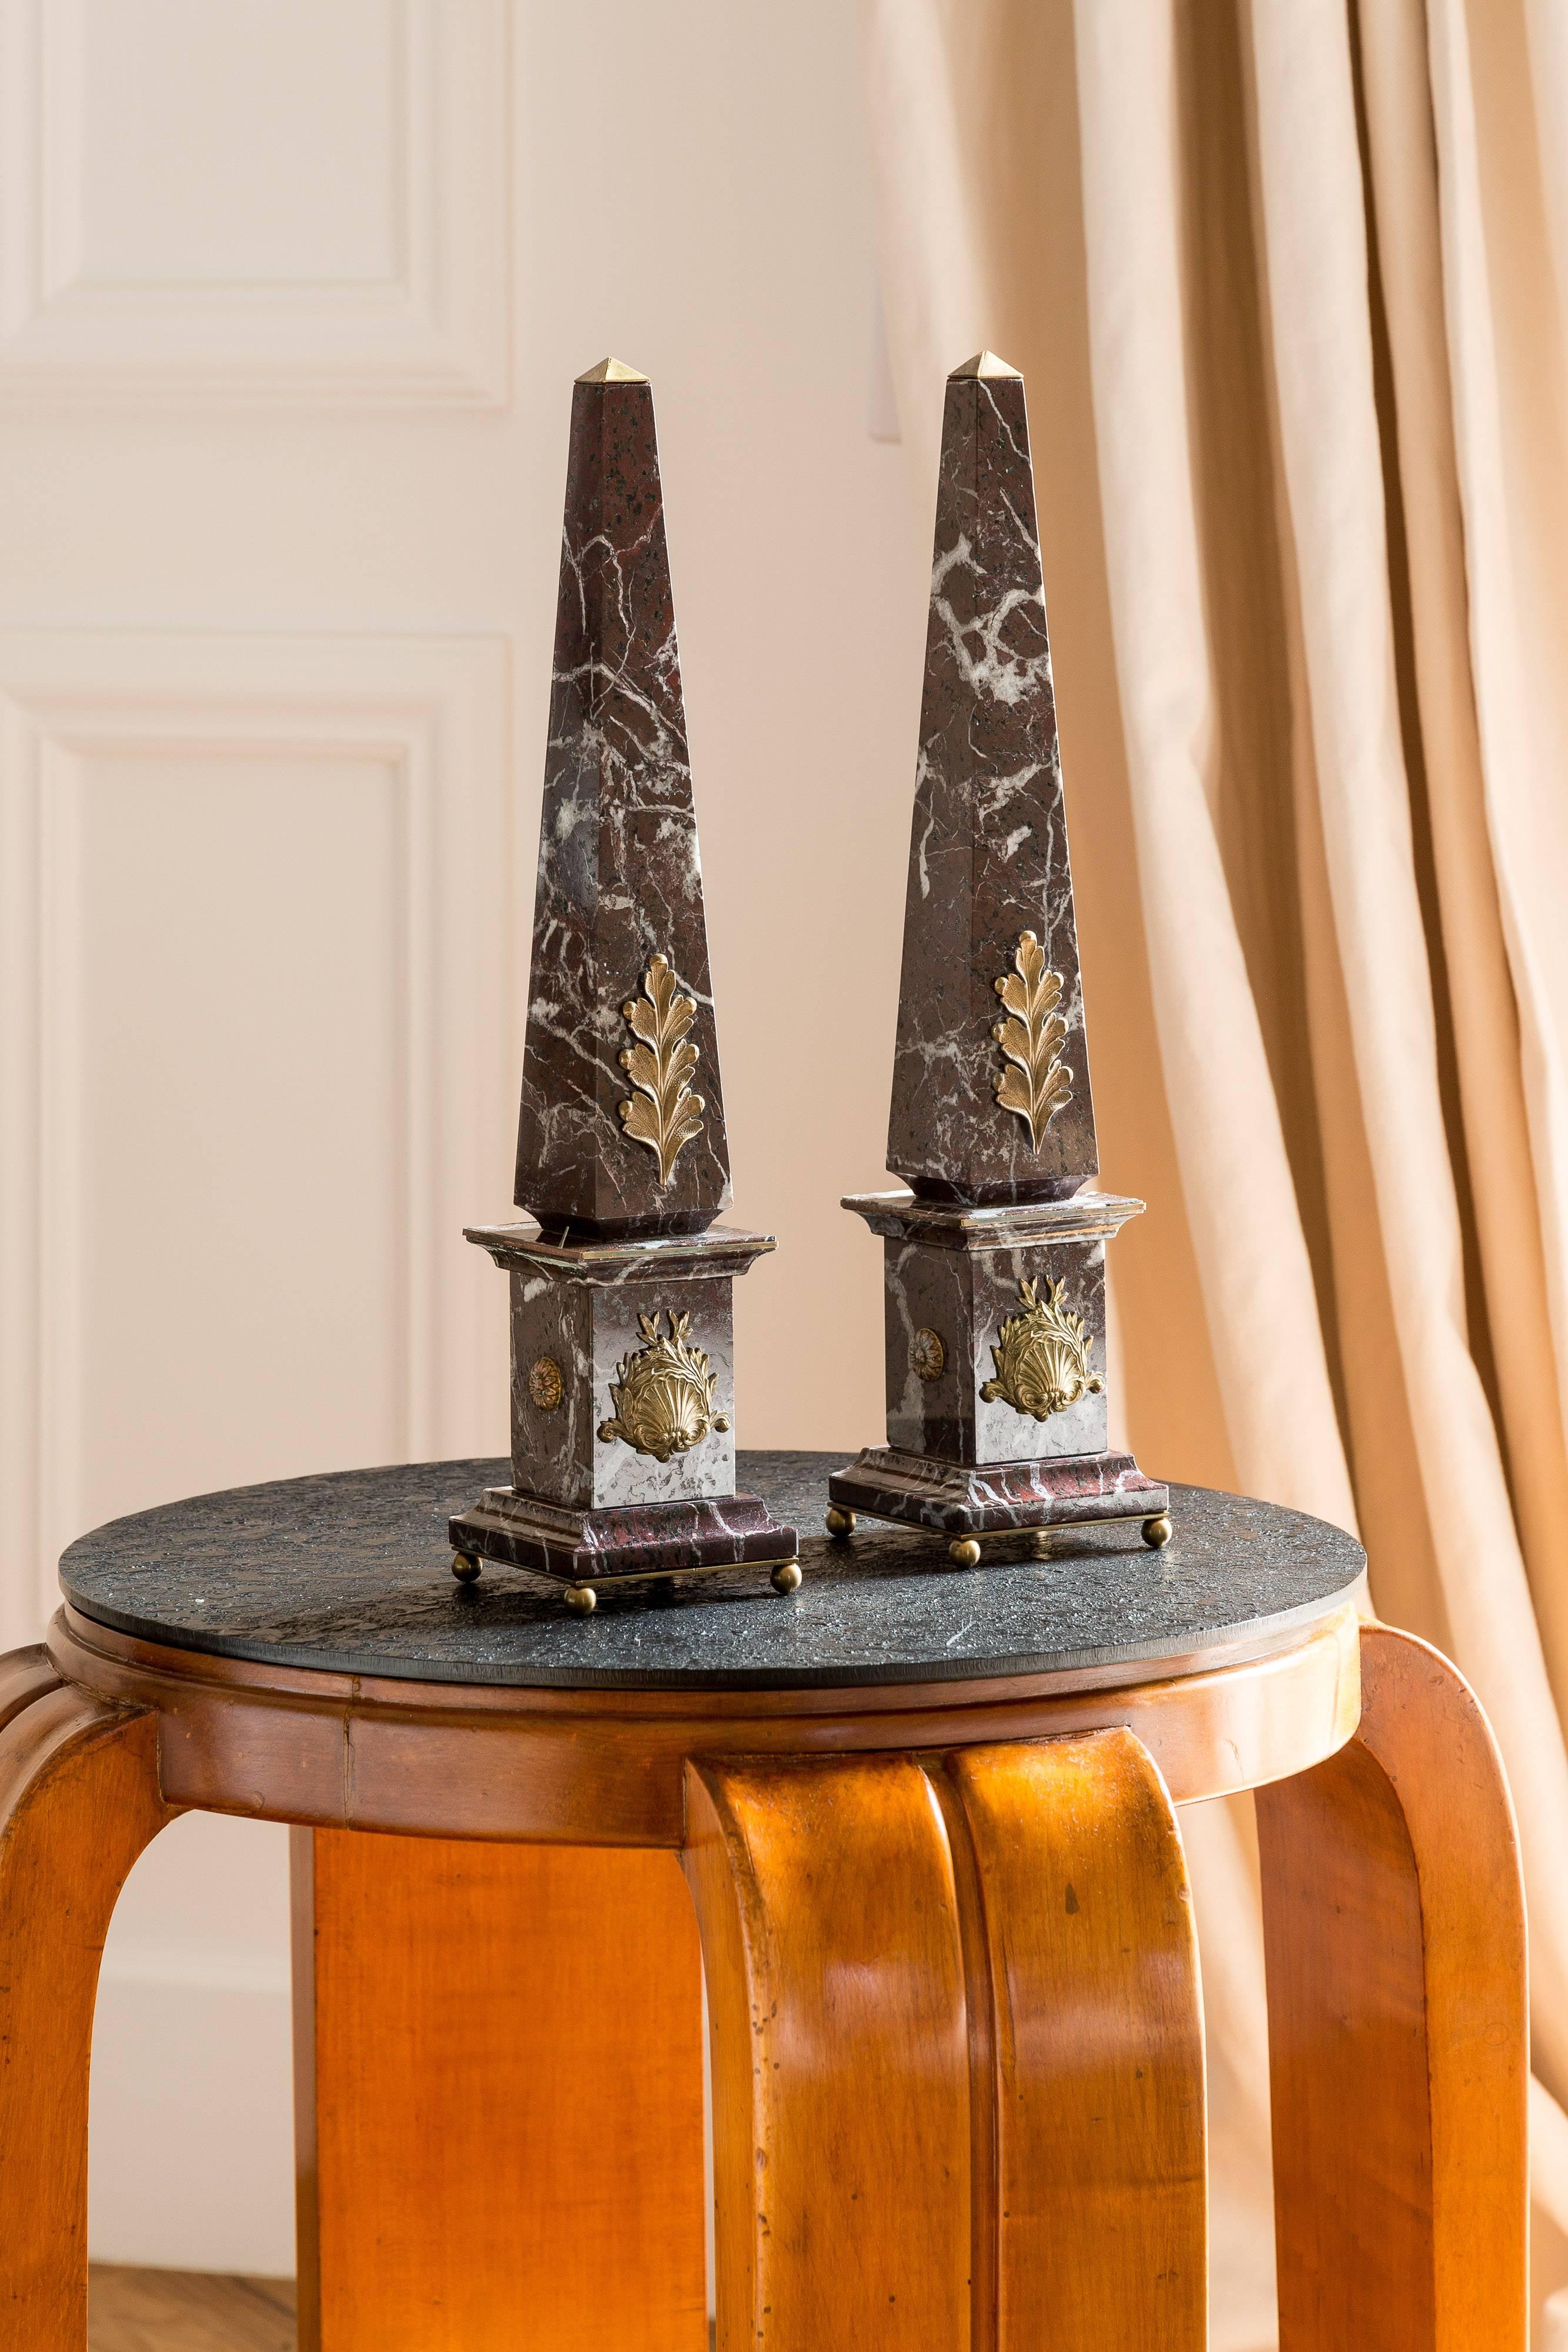 pair of italian marble and bronze obelisks, ACANTHUS , -grand tour collection- produced by Lorenzo Ciompi, 2017 
designed, produced and executed directly in exclusivity for COMPENDIO GALLERY on limited edition of 10 
all the bronze details was made